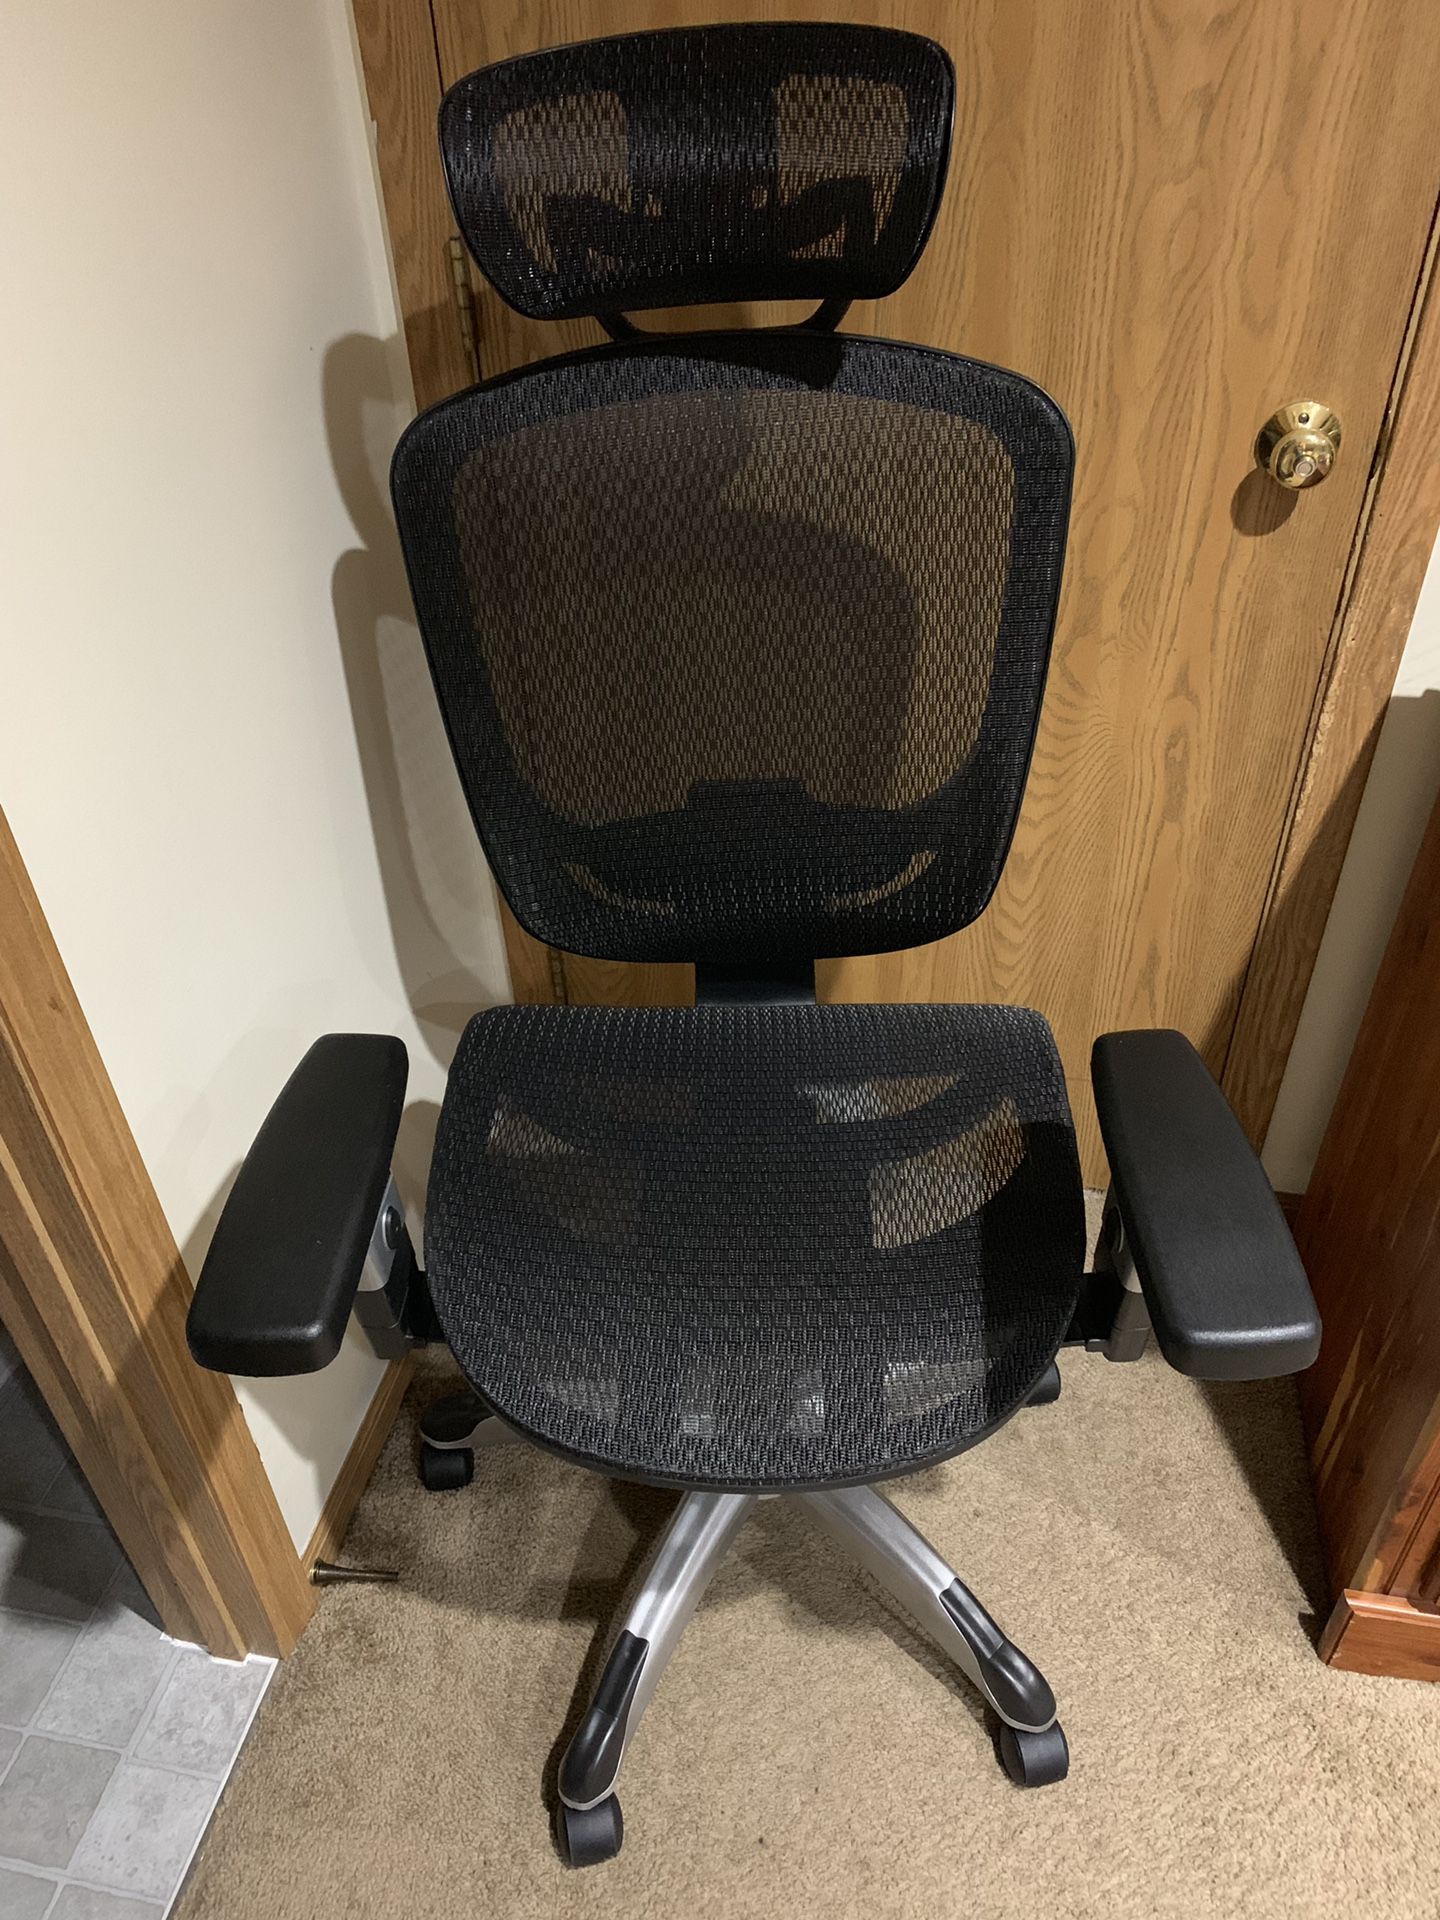 Hykens office chair new out the box